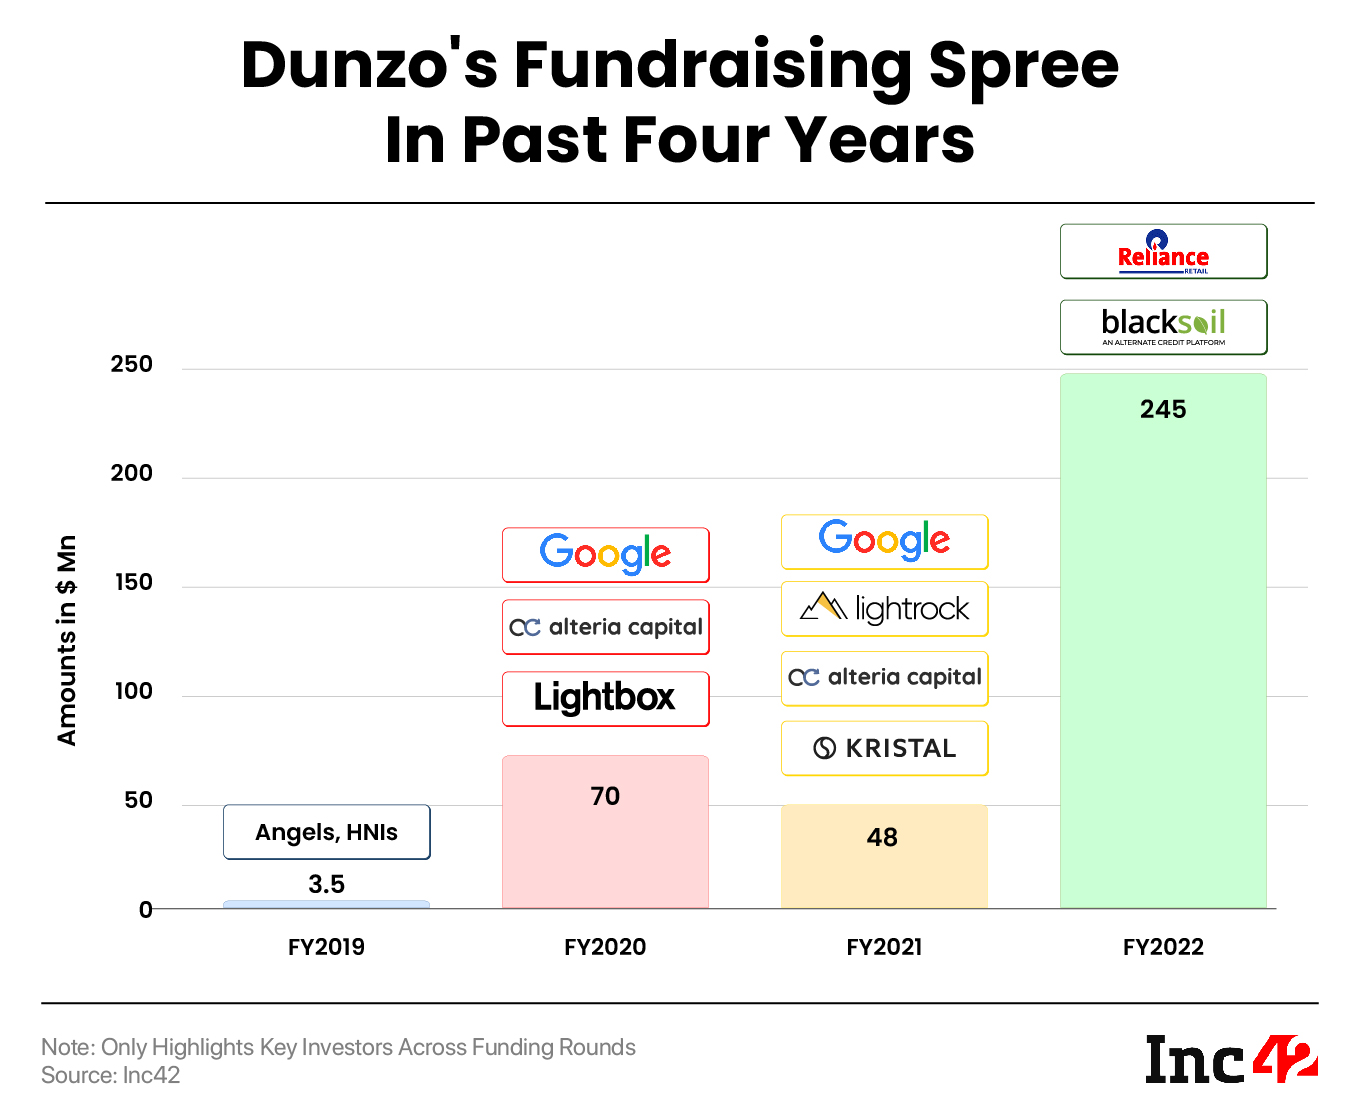 Where Did The Millions Raised By Dunzo Go?